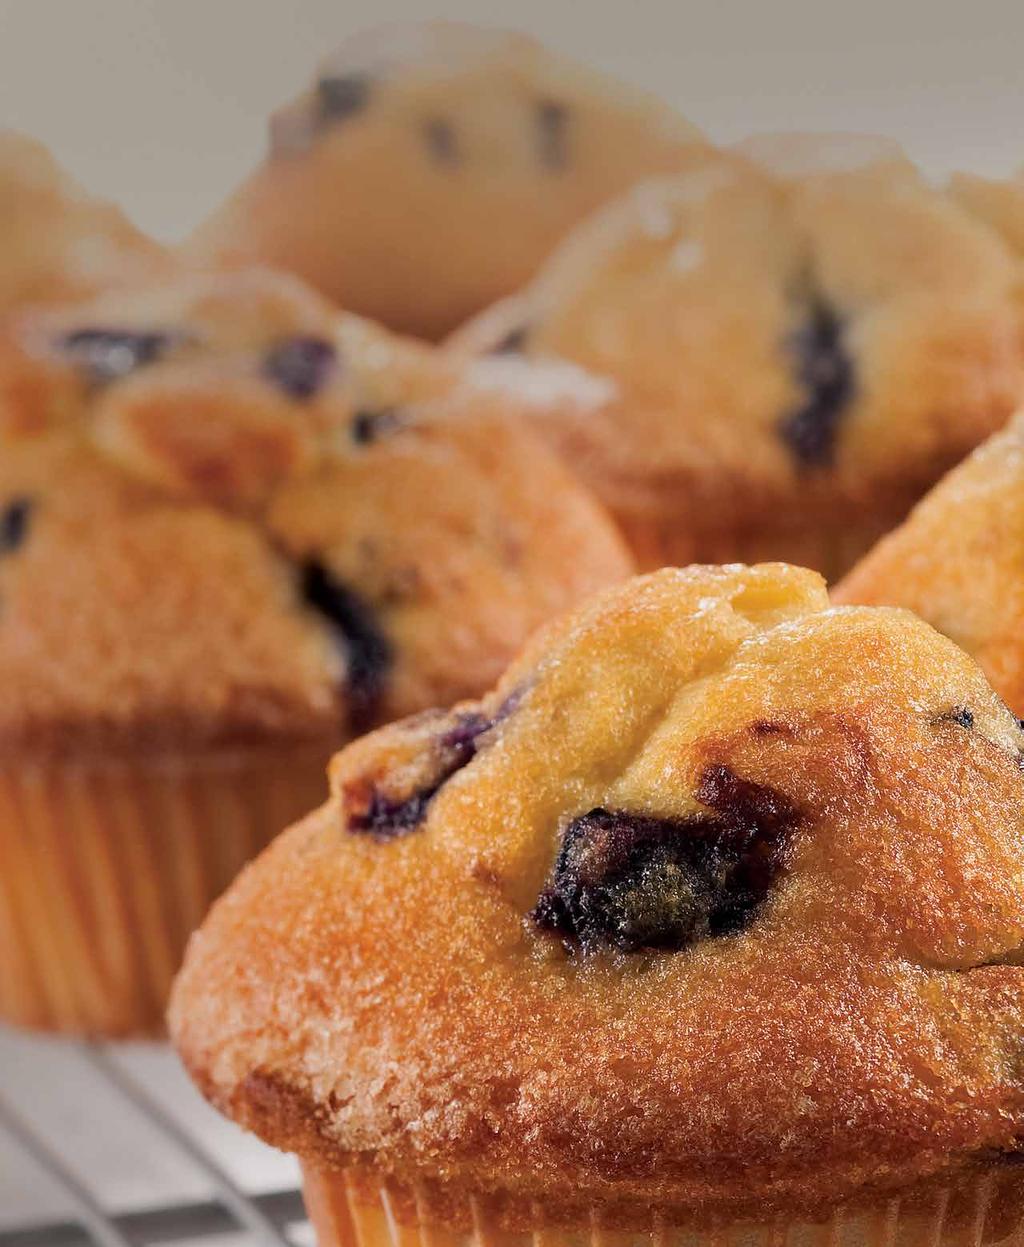 MUFFINS We believe in muffin innovation. Our experts introduced pre-deposited muffins to the industry, and we pioneered the Scoop-N-Bake format, too.